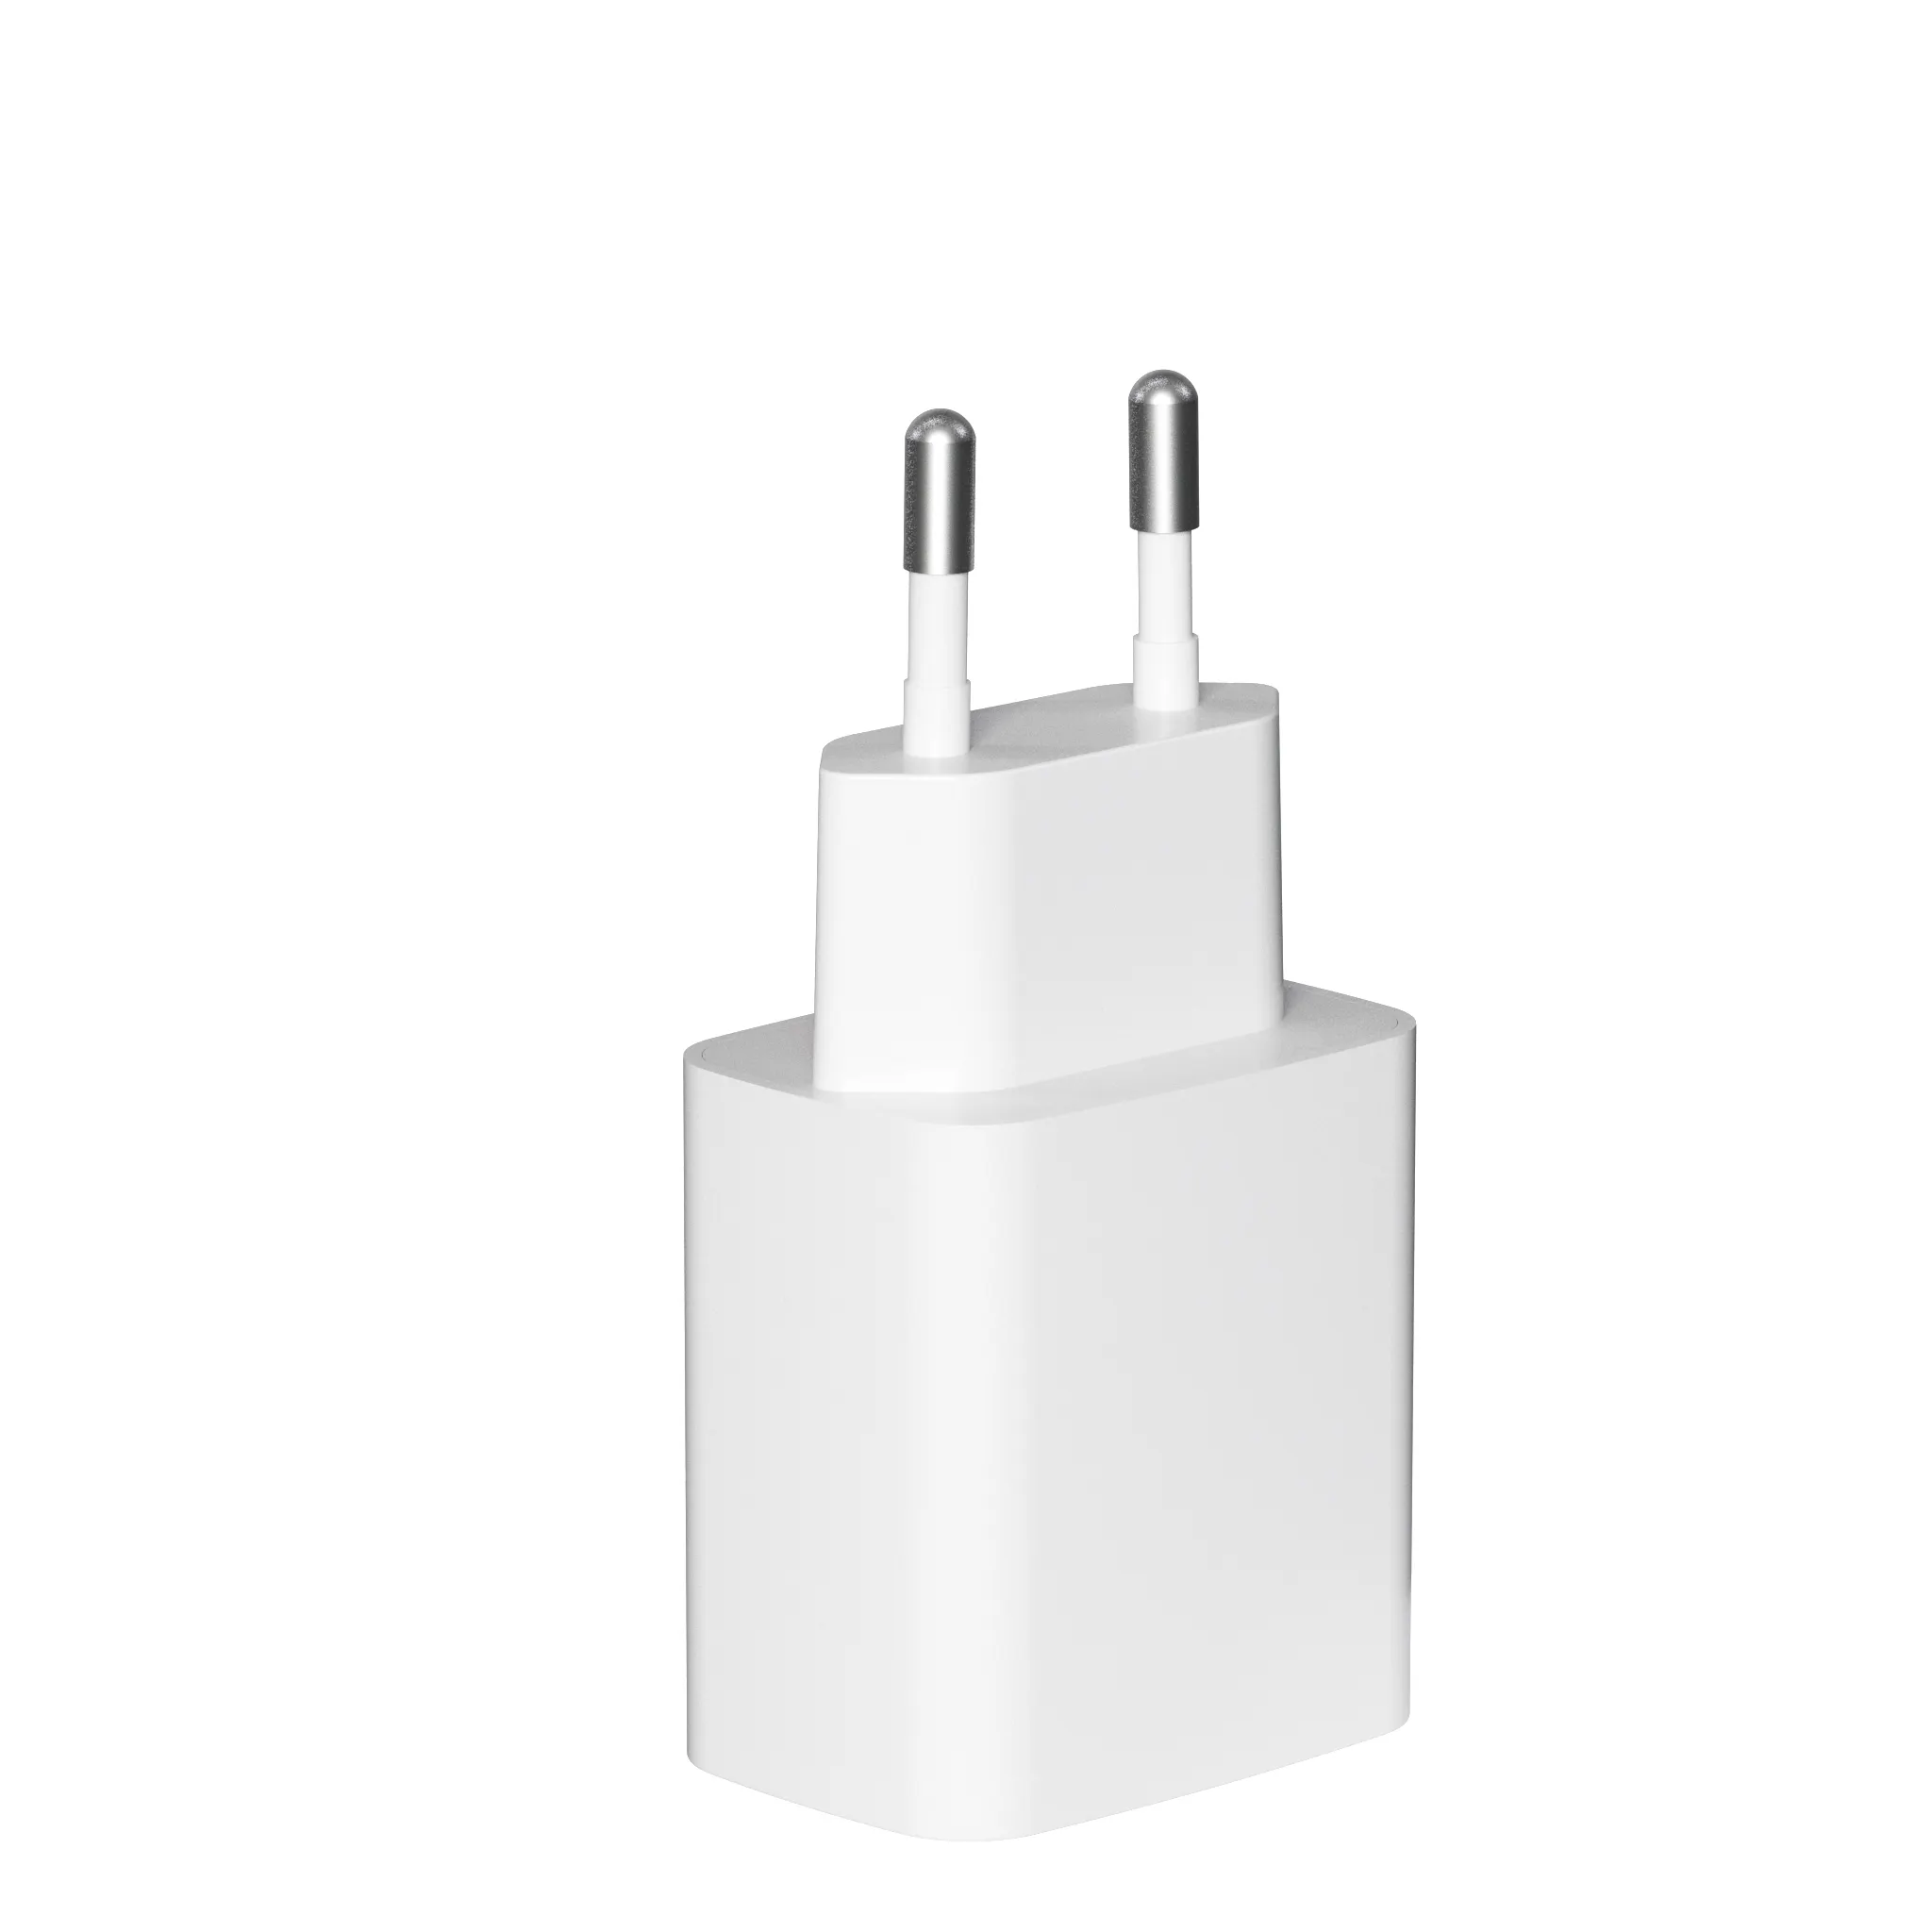 High-Efficiency Charging - 20W USB-C Adapter With EU Plug - Reliable Power For Your Devices